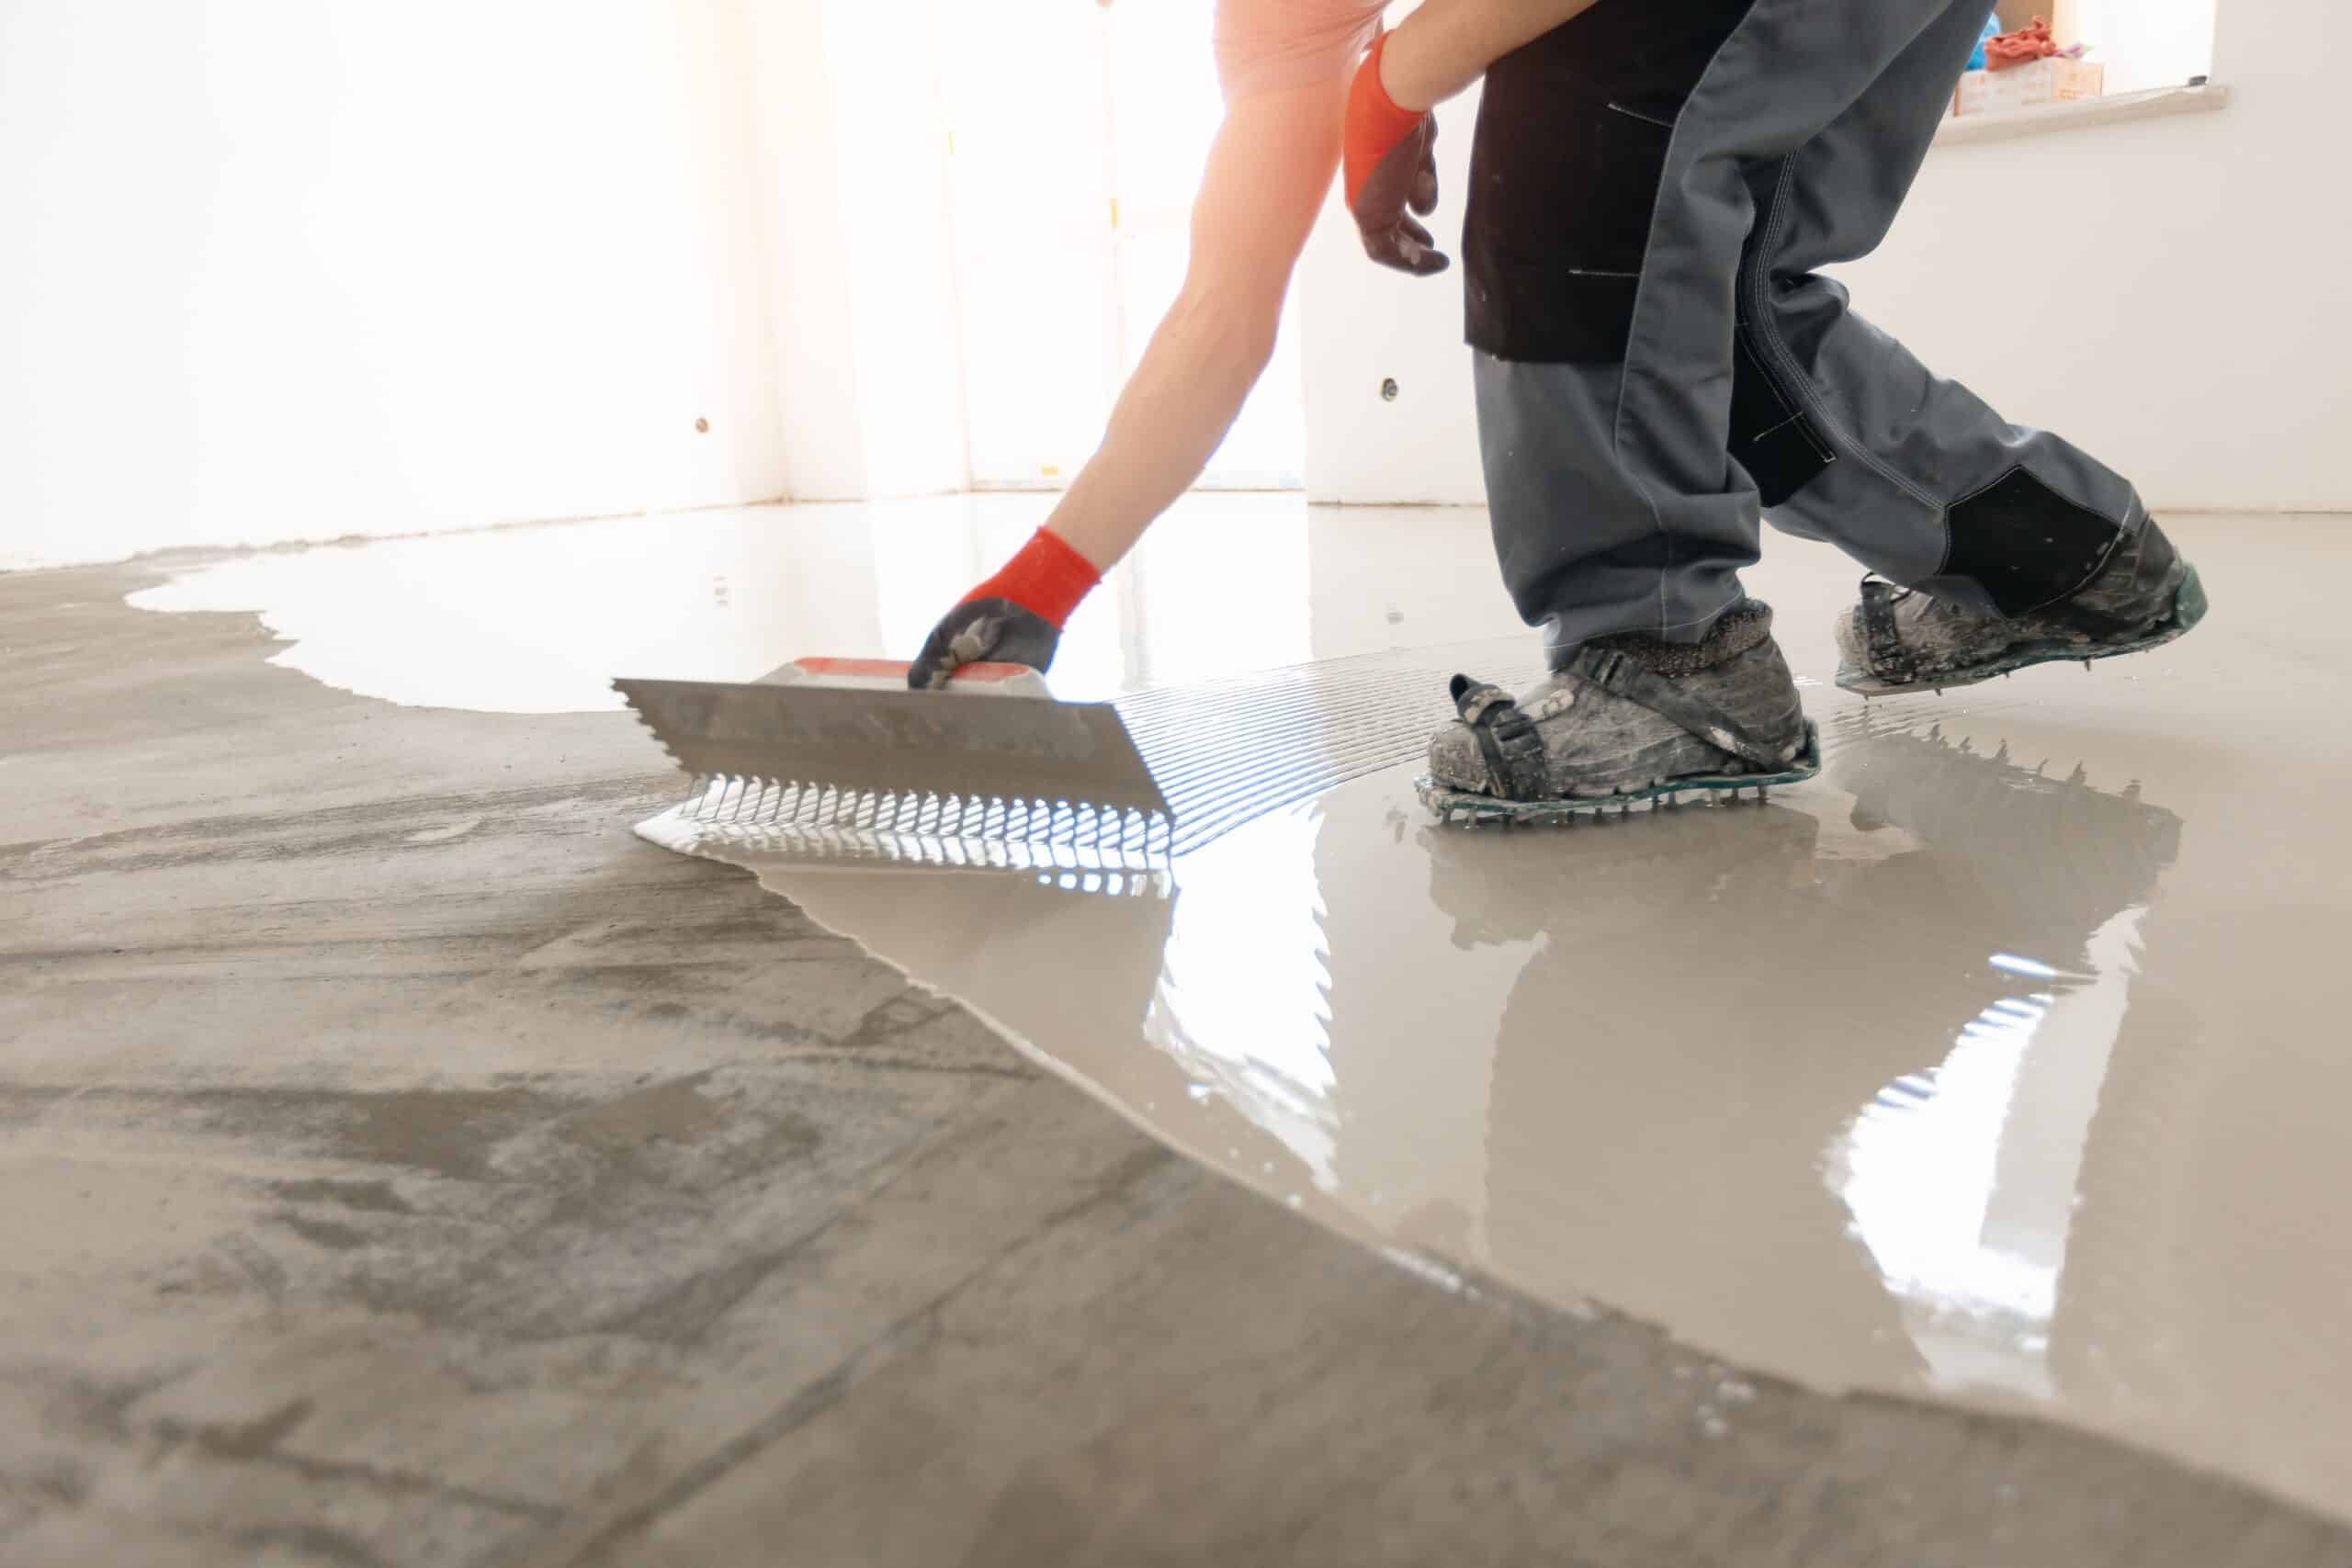 Enhance Safety with Non-Slip Concrete Coatings from Battleborn Concrete Coatings in Reno, NV